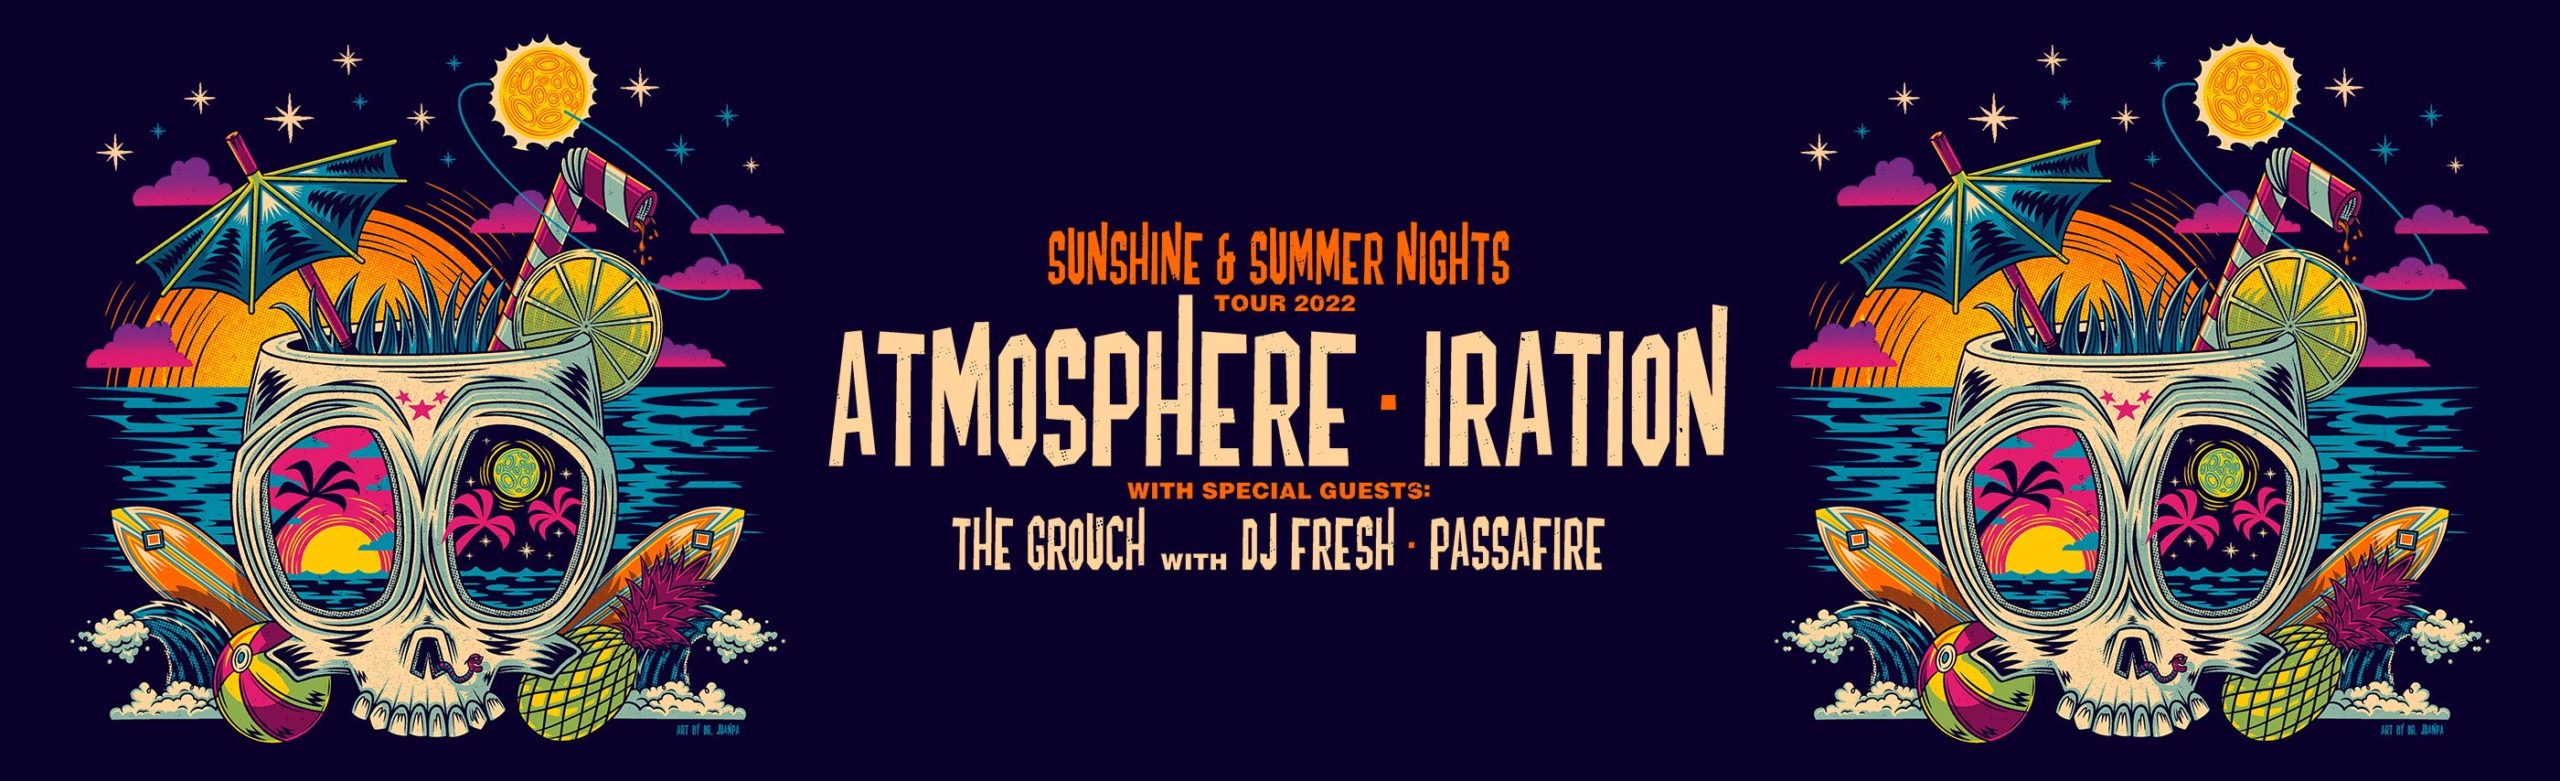 Event Info: Atmosphere and Iration at KettleHouse Amphitheater 2022 Image